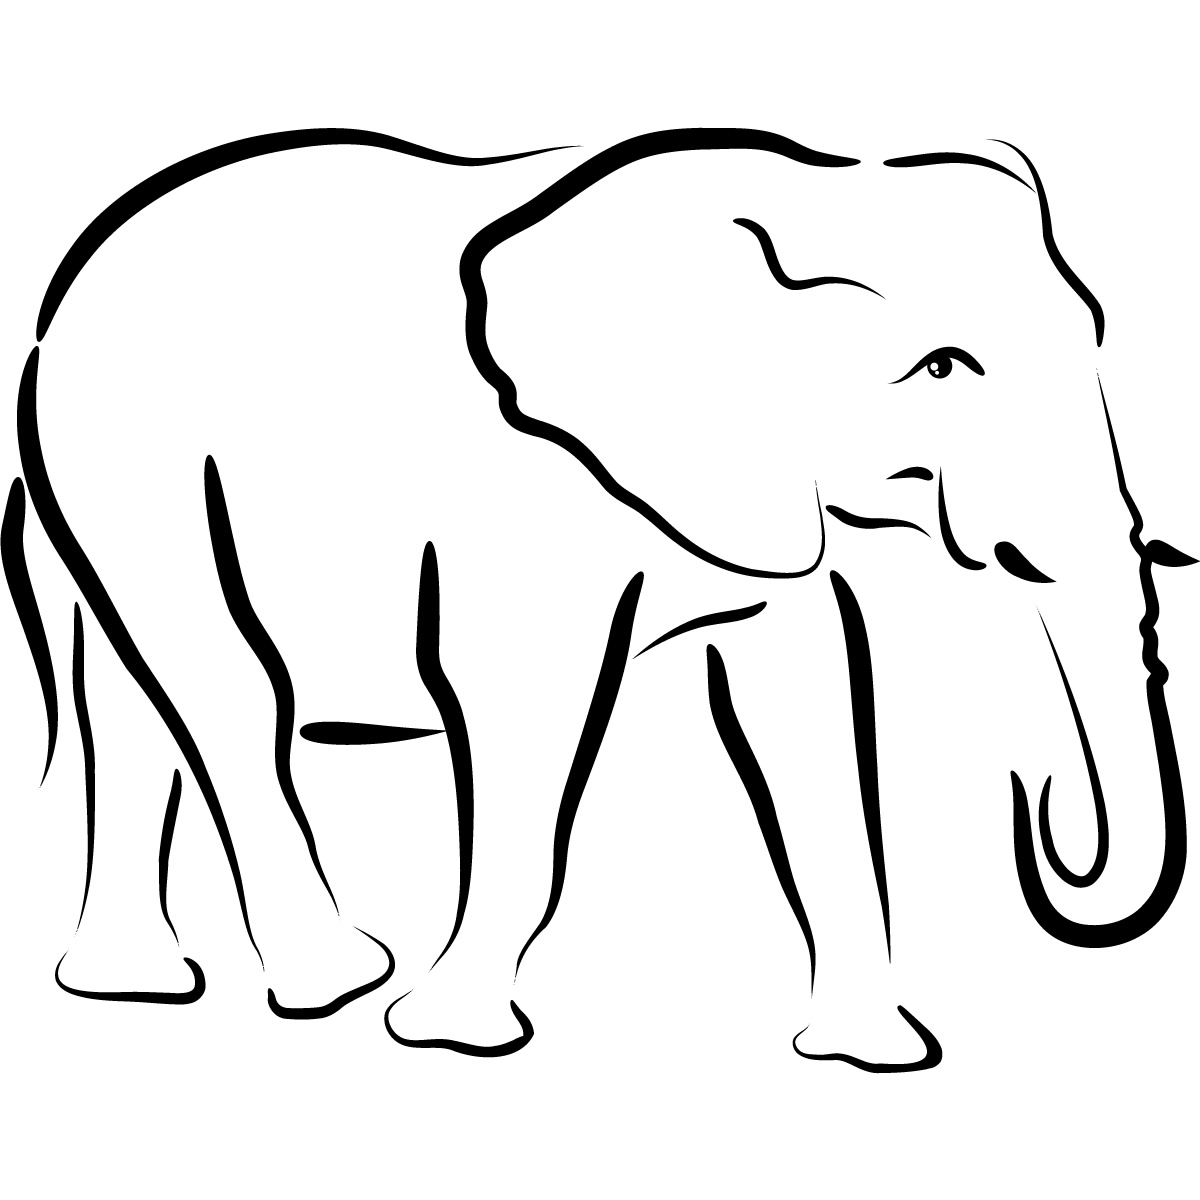 10 Elephant Drawing Outline   Free Cliparts That You Can Download To